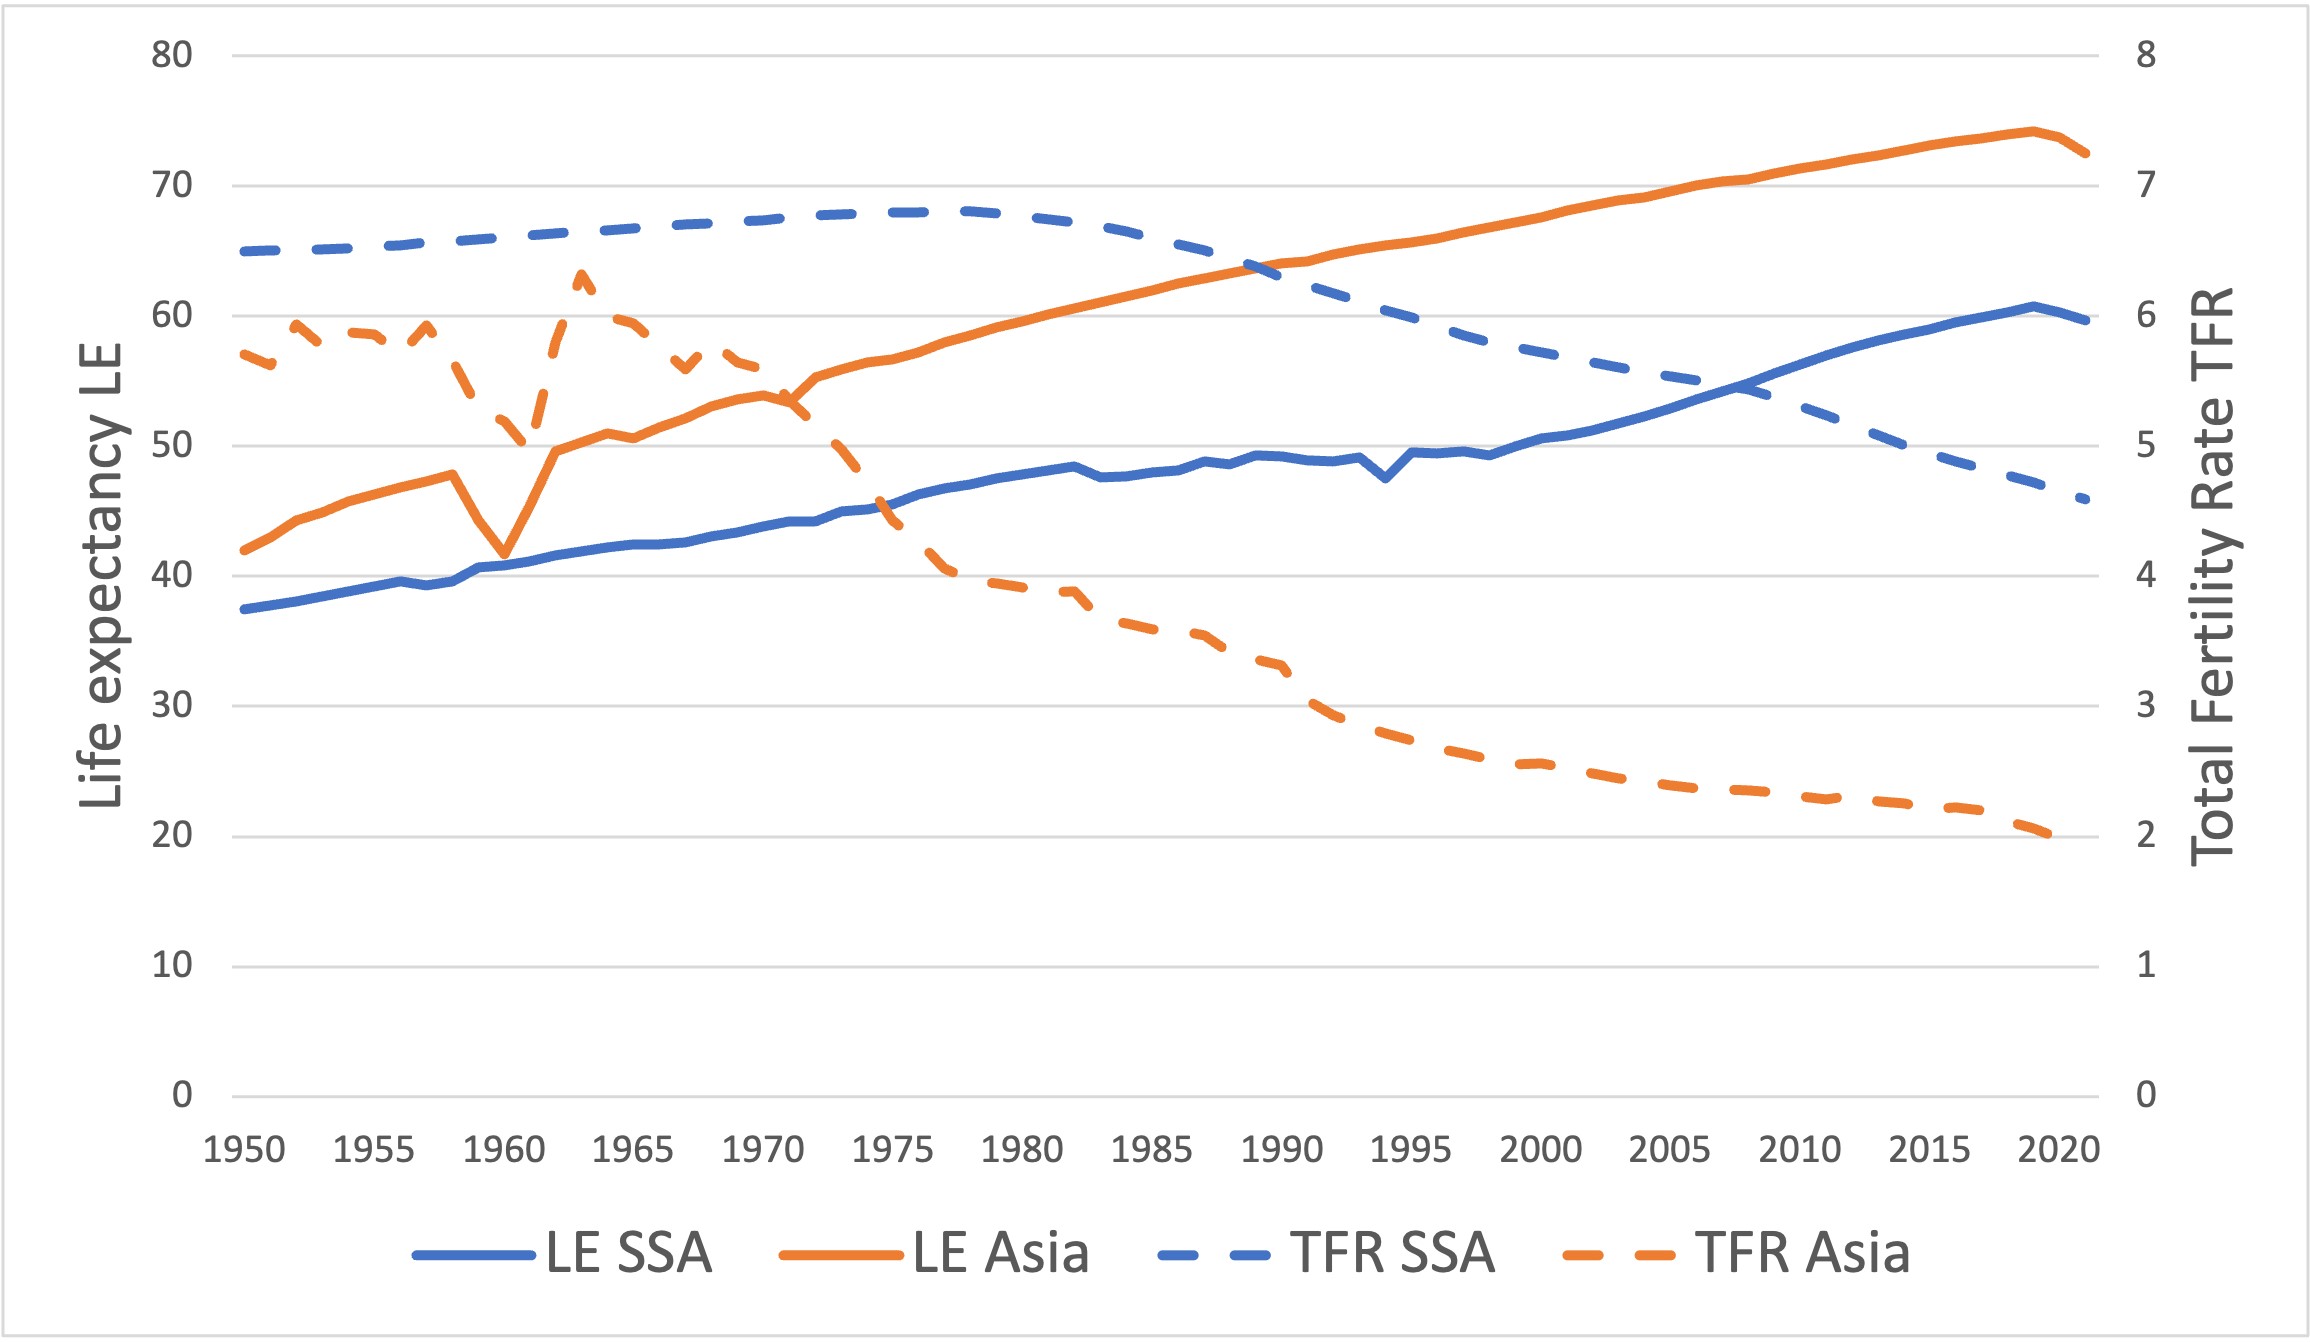 Figure 2 Life expectancy (LE) and fertility (TFR) in Sub-Saharan Africa and Asia 1950-2021. Source: UN DESA